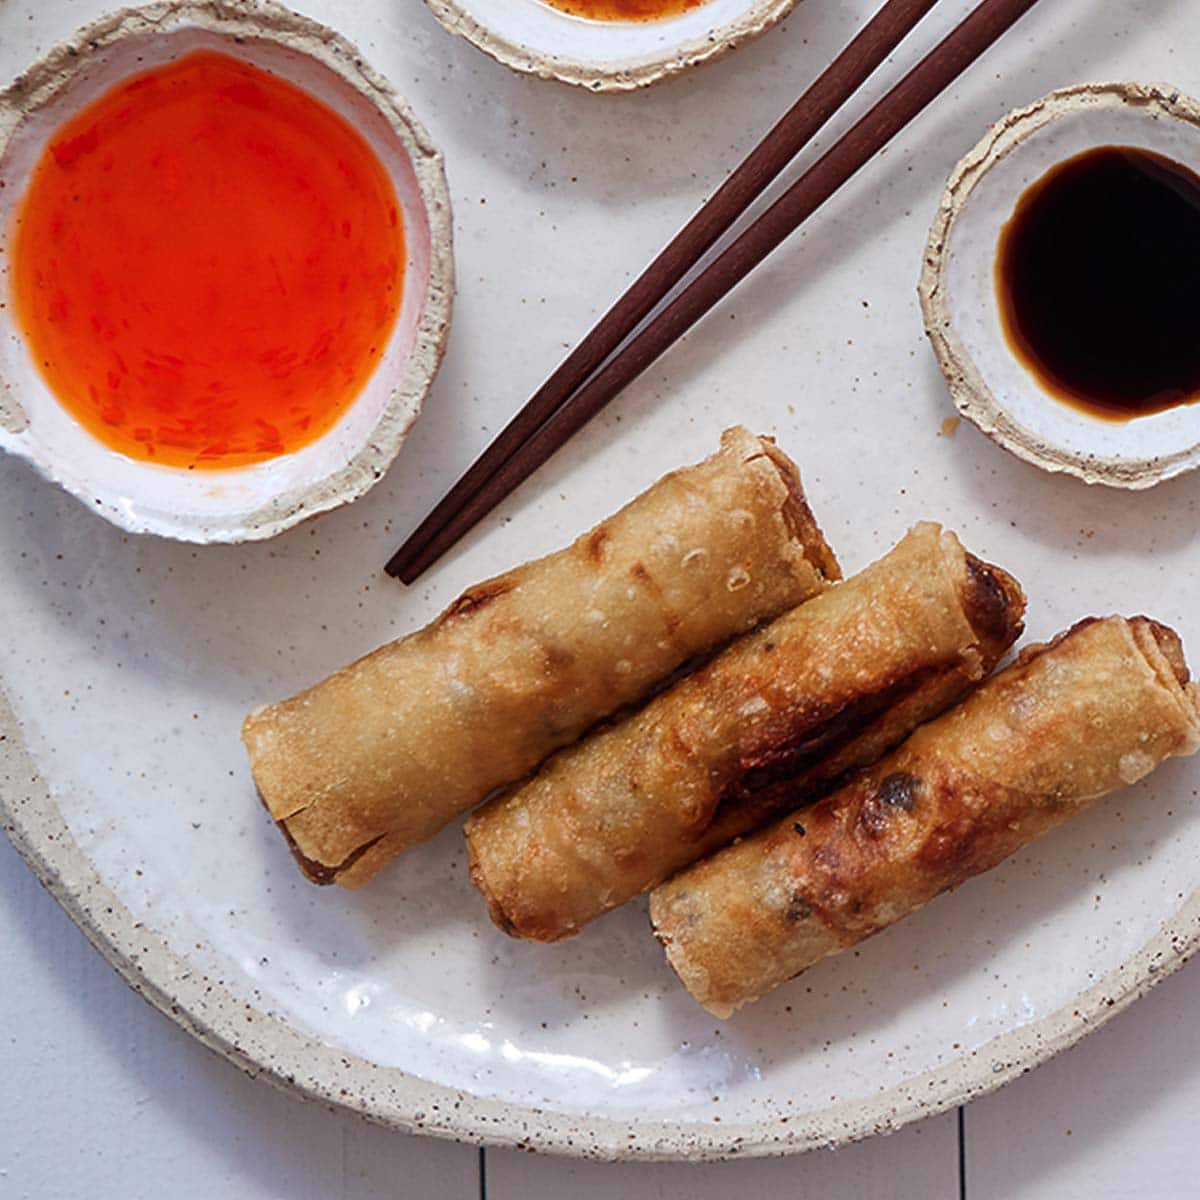 Be sure that the filling of your egg rolls is not too soggy. You don’t need heavy amounts of gravy in your egg rolls at all.